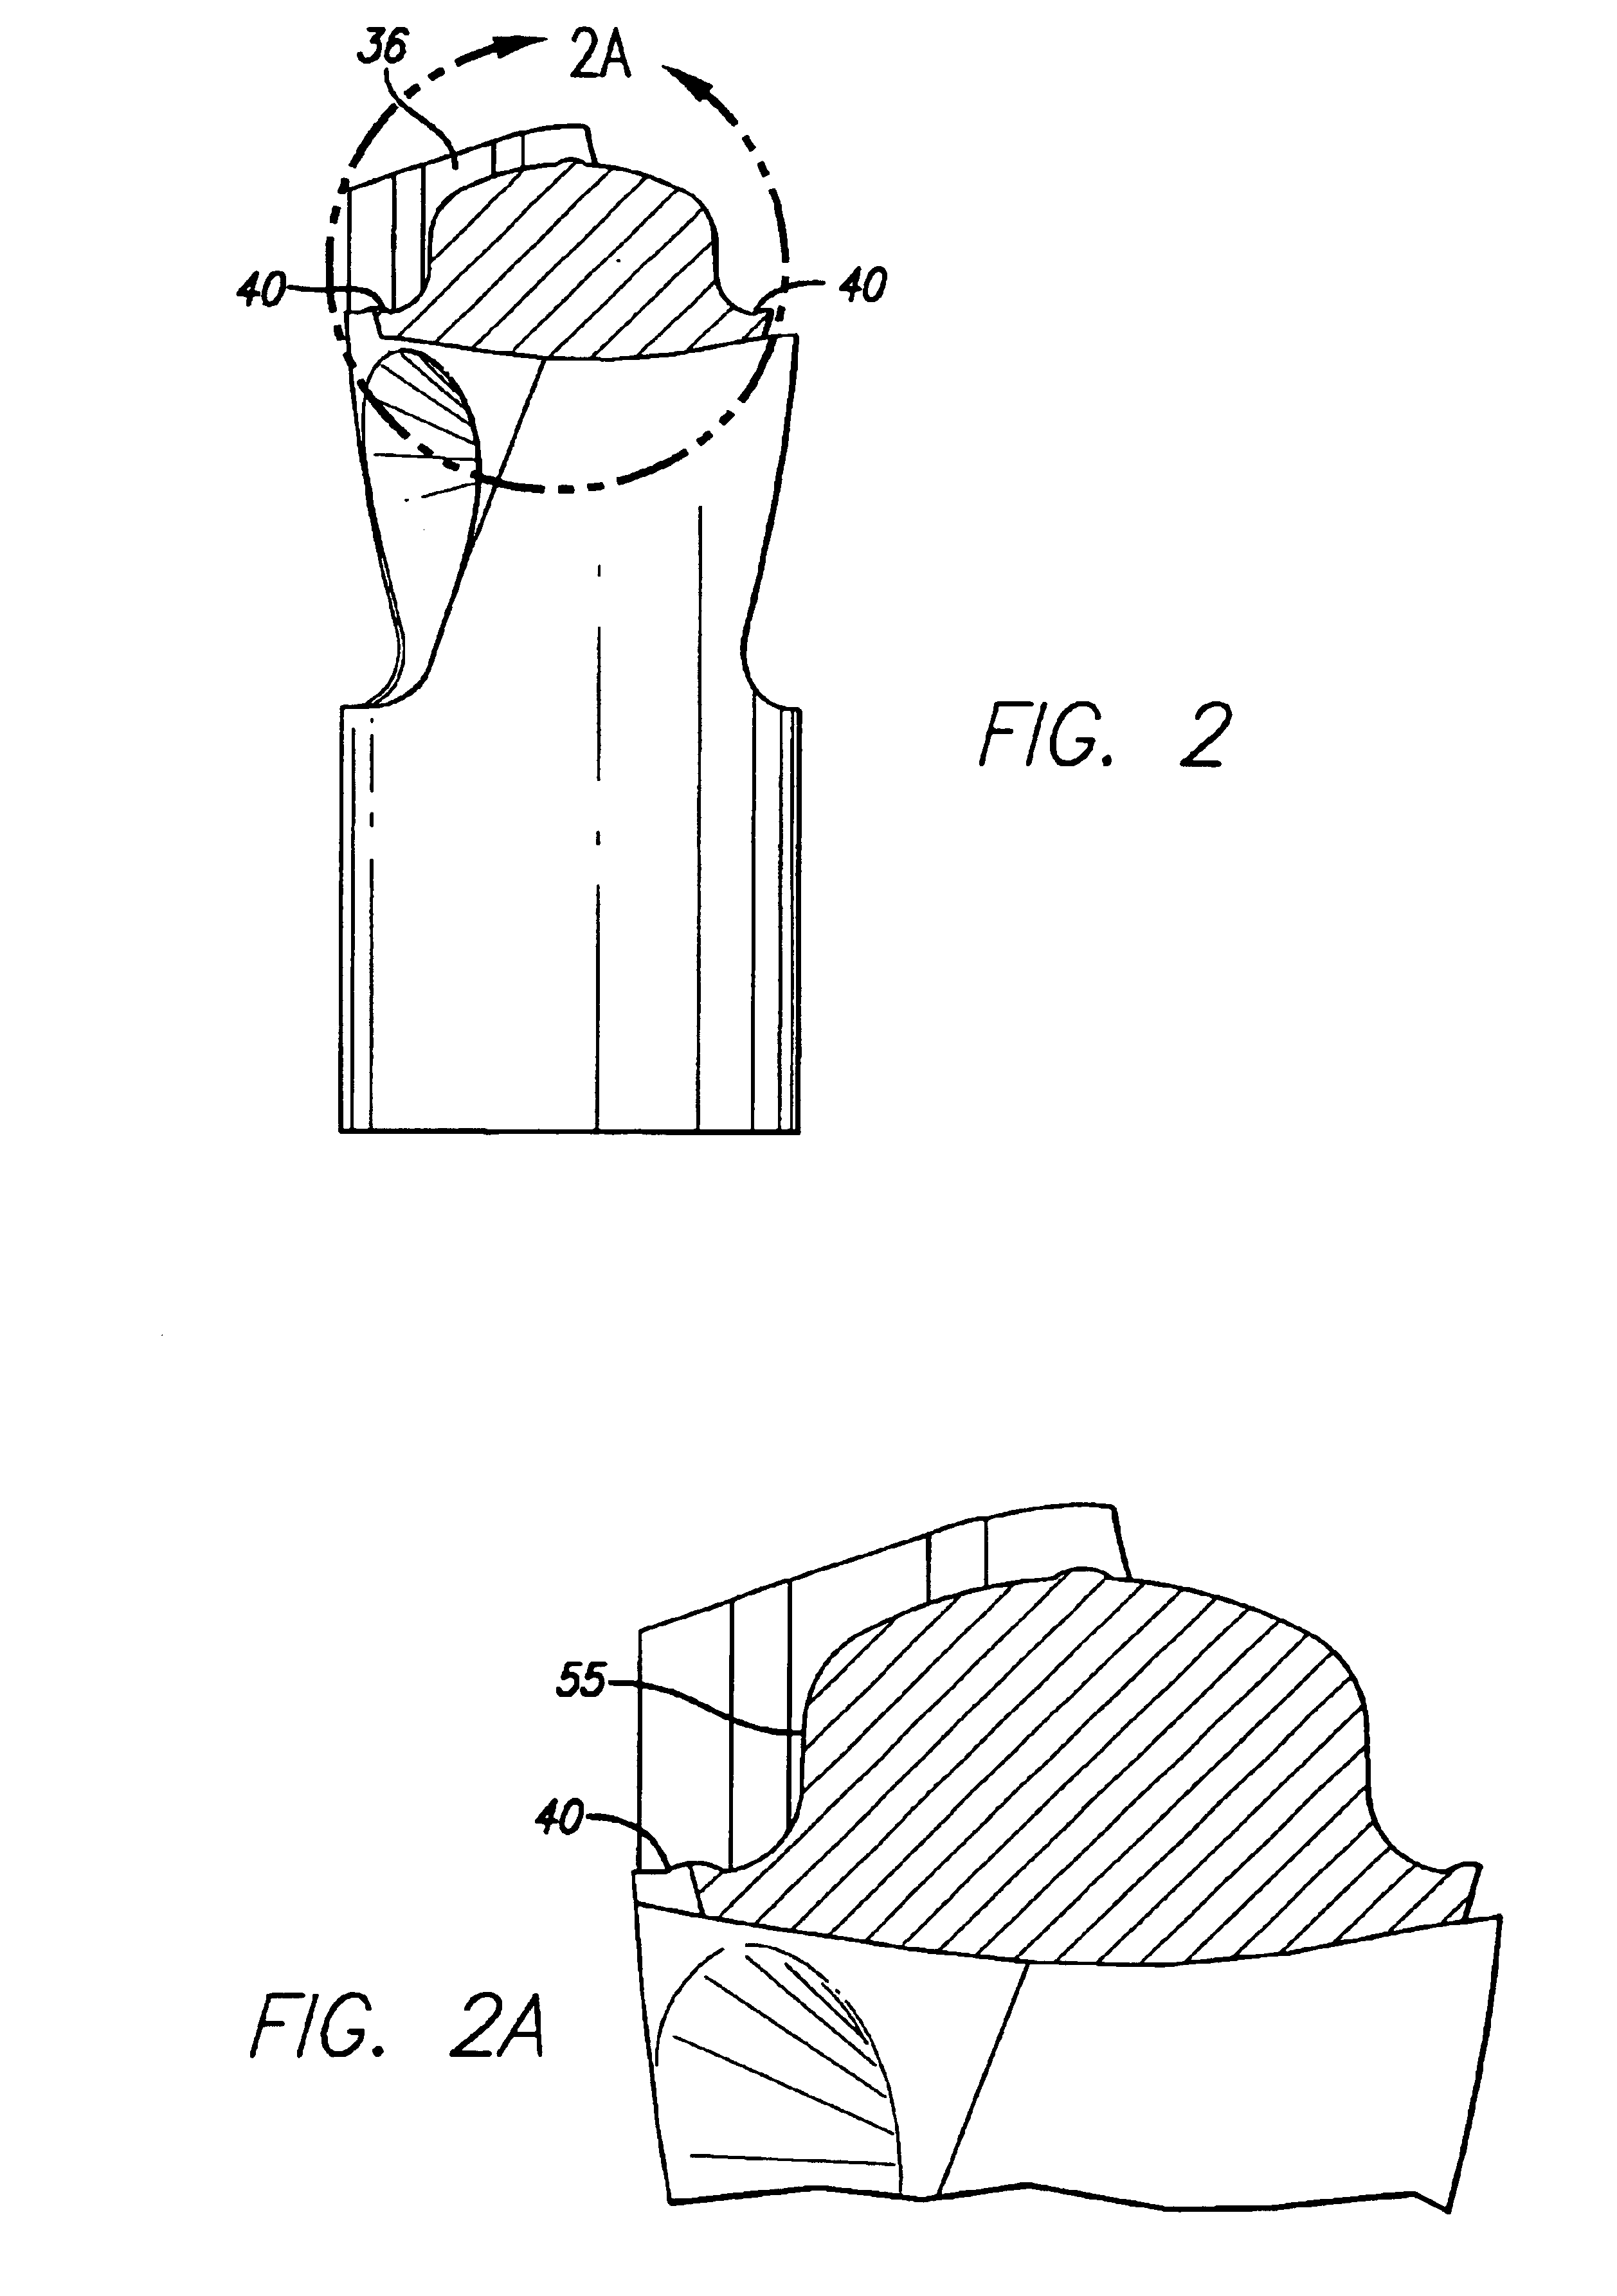 Roof bit and insert assembly